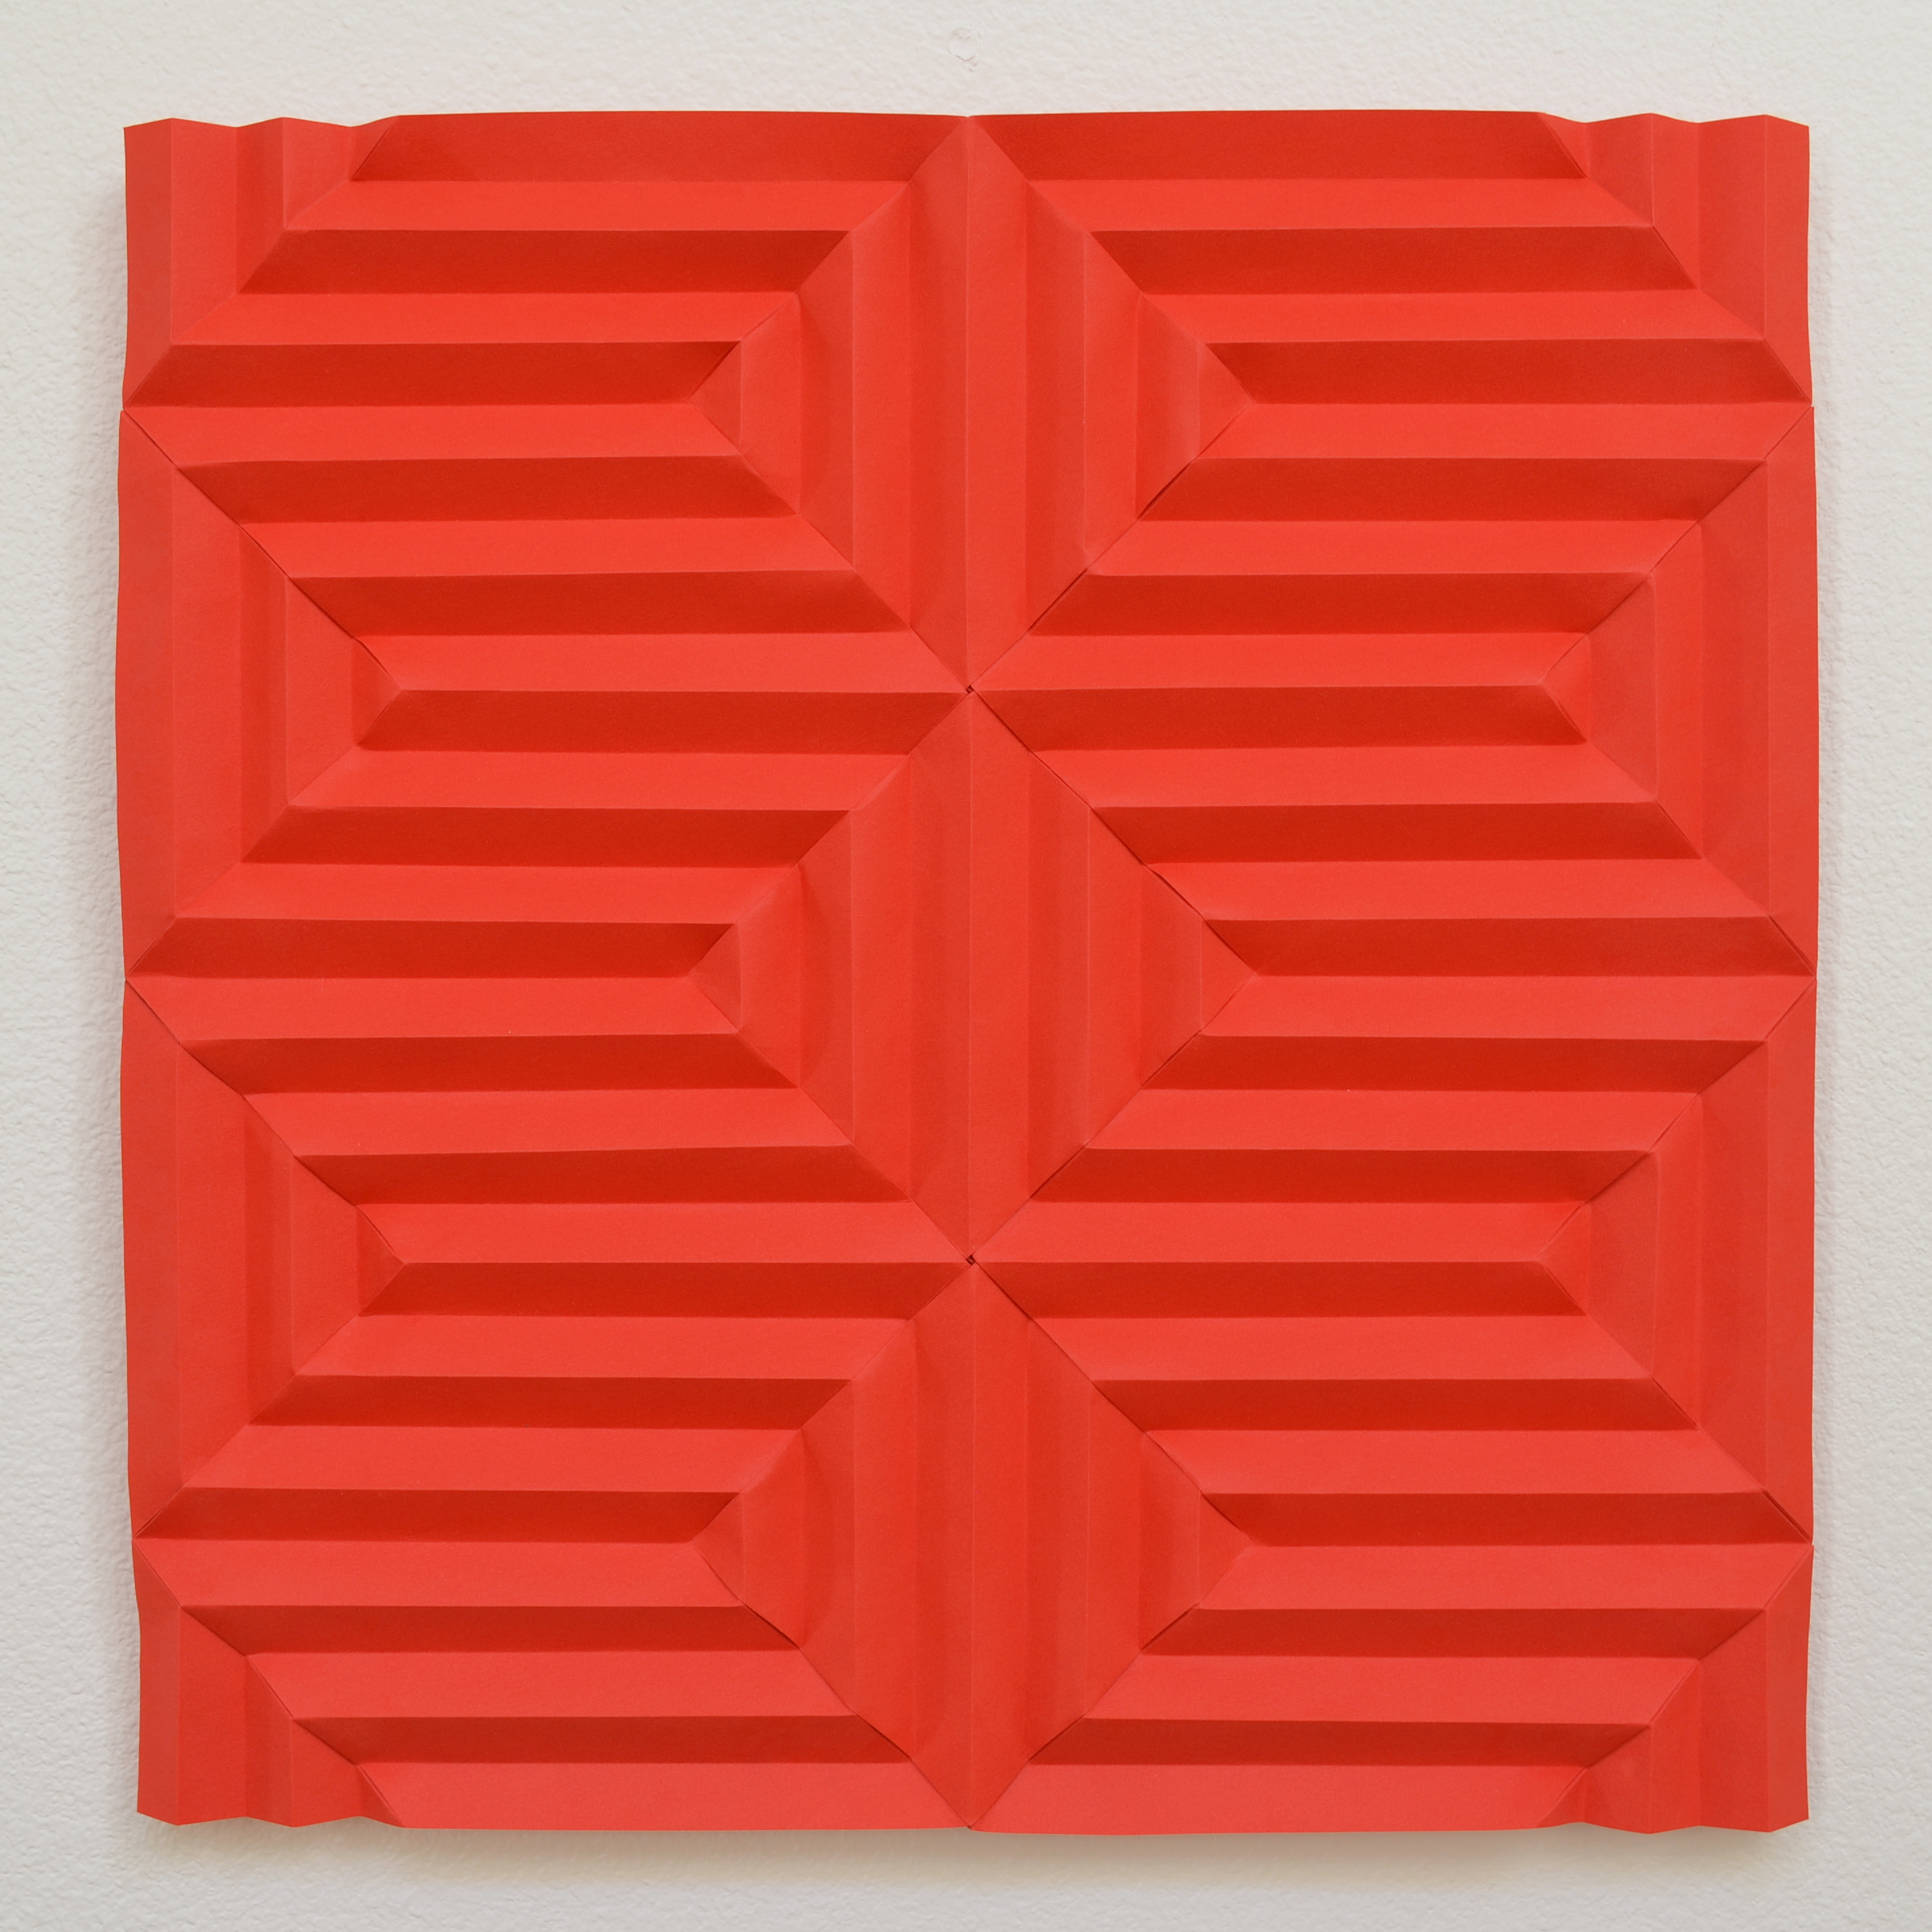 Joseph Hwang, Red 1, 2022. Paper mount on canvas, 24" x 24".